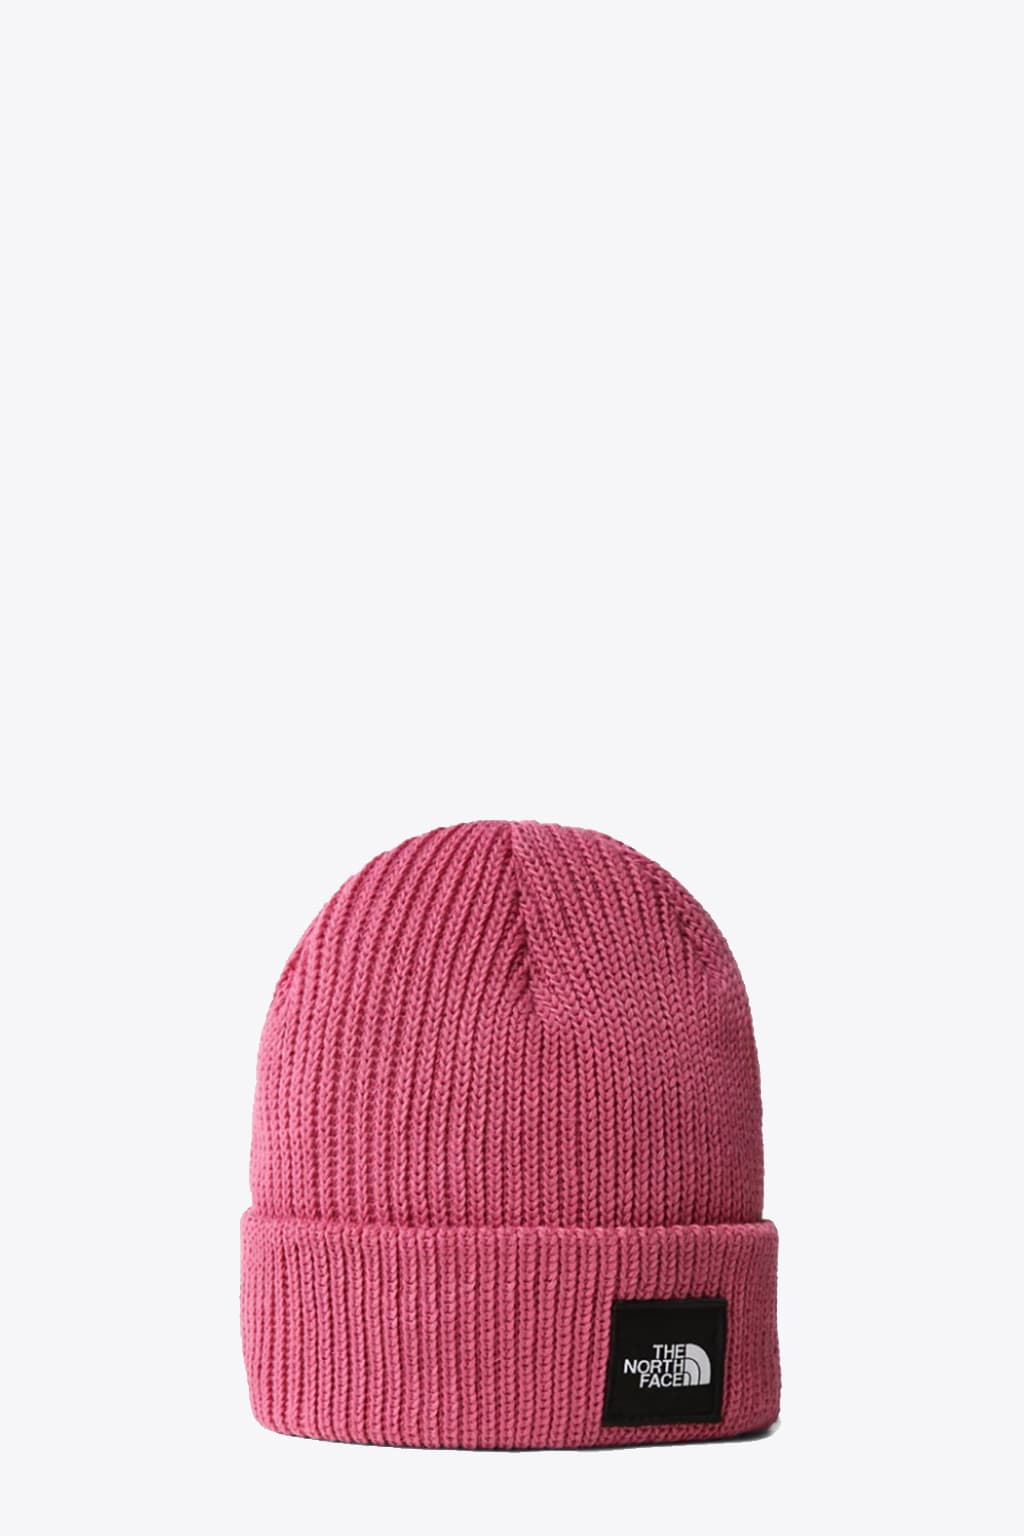 The North Face Explore Beanie Red Violet Pink Rib-knit Beanie With Box Logo -explore Beanie